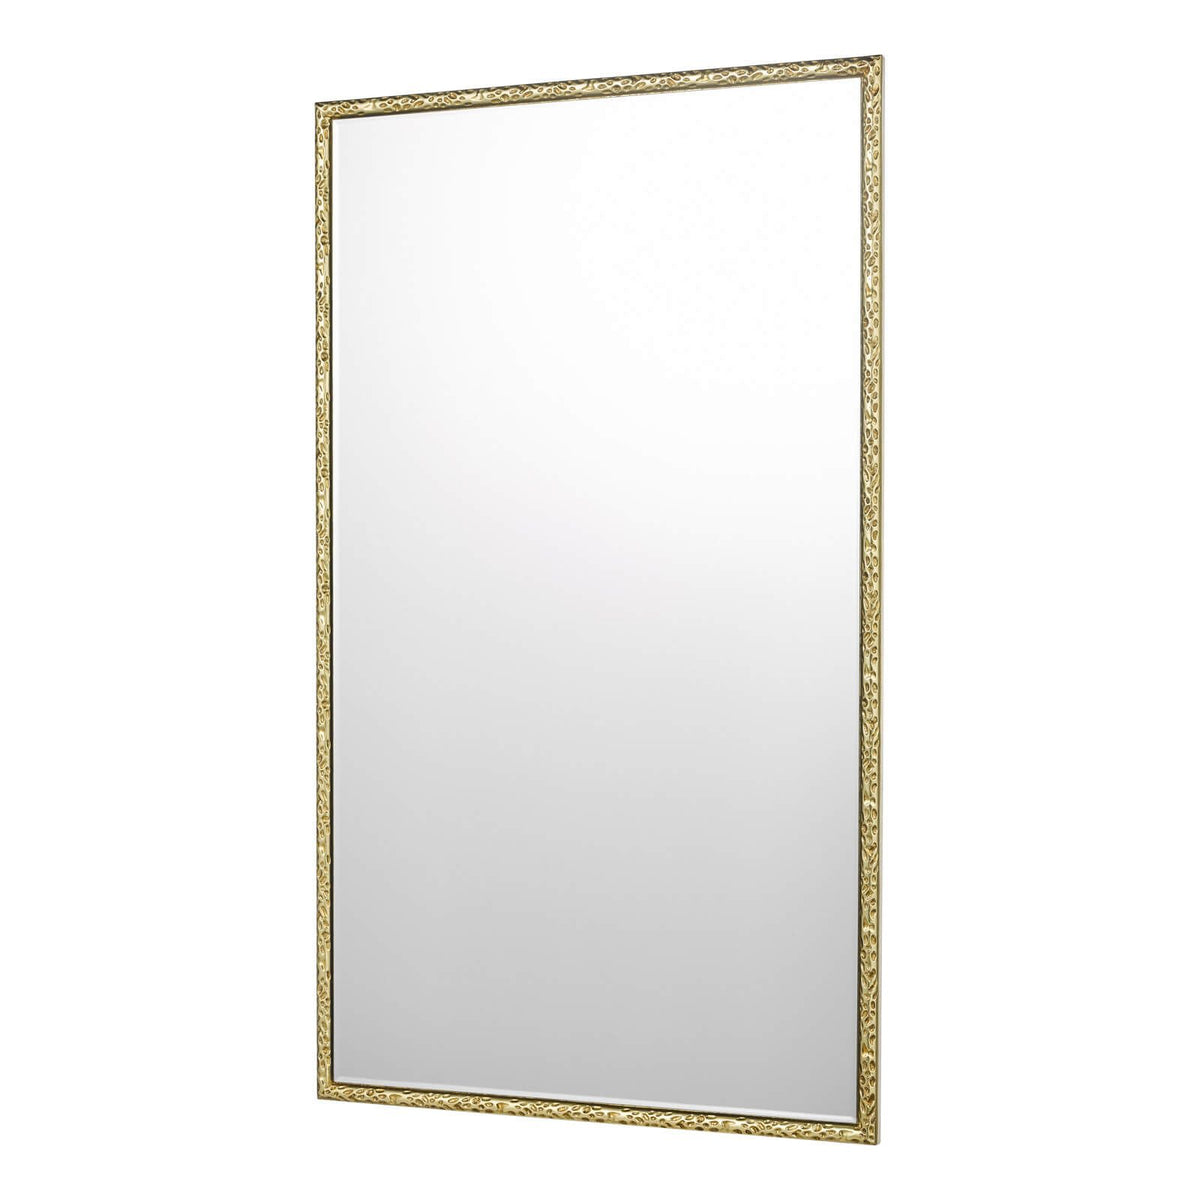 Jinelle Rectangle/Round Mirror Textured Gold Frame 